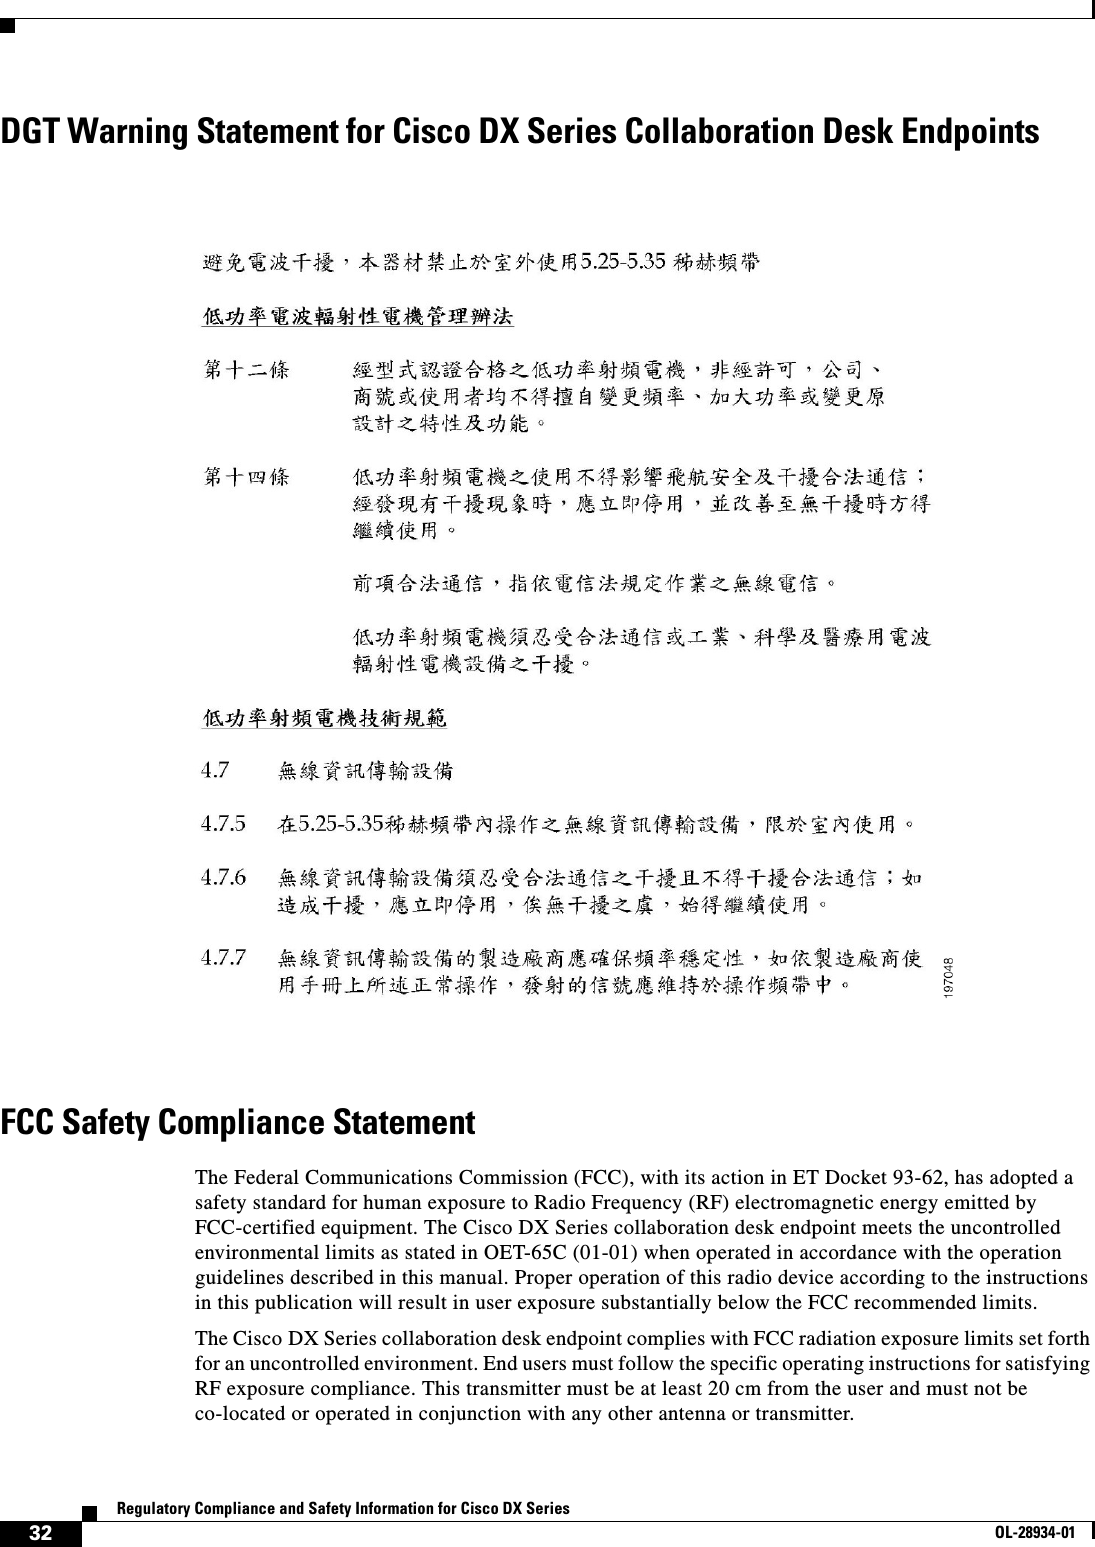  32Regulatory Compliance and Safety Information for Cisco DX SeriesOL-28934-01DGT Warning Statement for Cisco DX Series Collaboration Desk EndpointsFCC Safety Compliance StatementThe Federal Communications Commission (FCC), with its action in ET Docket 93-62, has adopted a safety standard for human exposure to Radio Frequency (RF) electromagnetic energy emitted by FCC-certified equipment. The Cisco DX Series collaboration desk endpoint meets the uncontrolled environmental limits as stated in OET-65C (01-01) when operated in accordance with the operation guidelines described in this manual. Proper operation of this radio device according to the instructions in this publication will result in user exposure substantially below the FCC recommended limits.The Cisco DX Series collaboration desk endpoint complies with FCC radiation exposure limits set forth for an uncontrolled environment. End users must follow the specific operating instructions for satisfying RF exposure compliance. This transmitter must be at least 20 cm from the user and must not be co-located or operated in conjunction with any other antenna or transmitter.